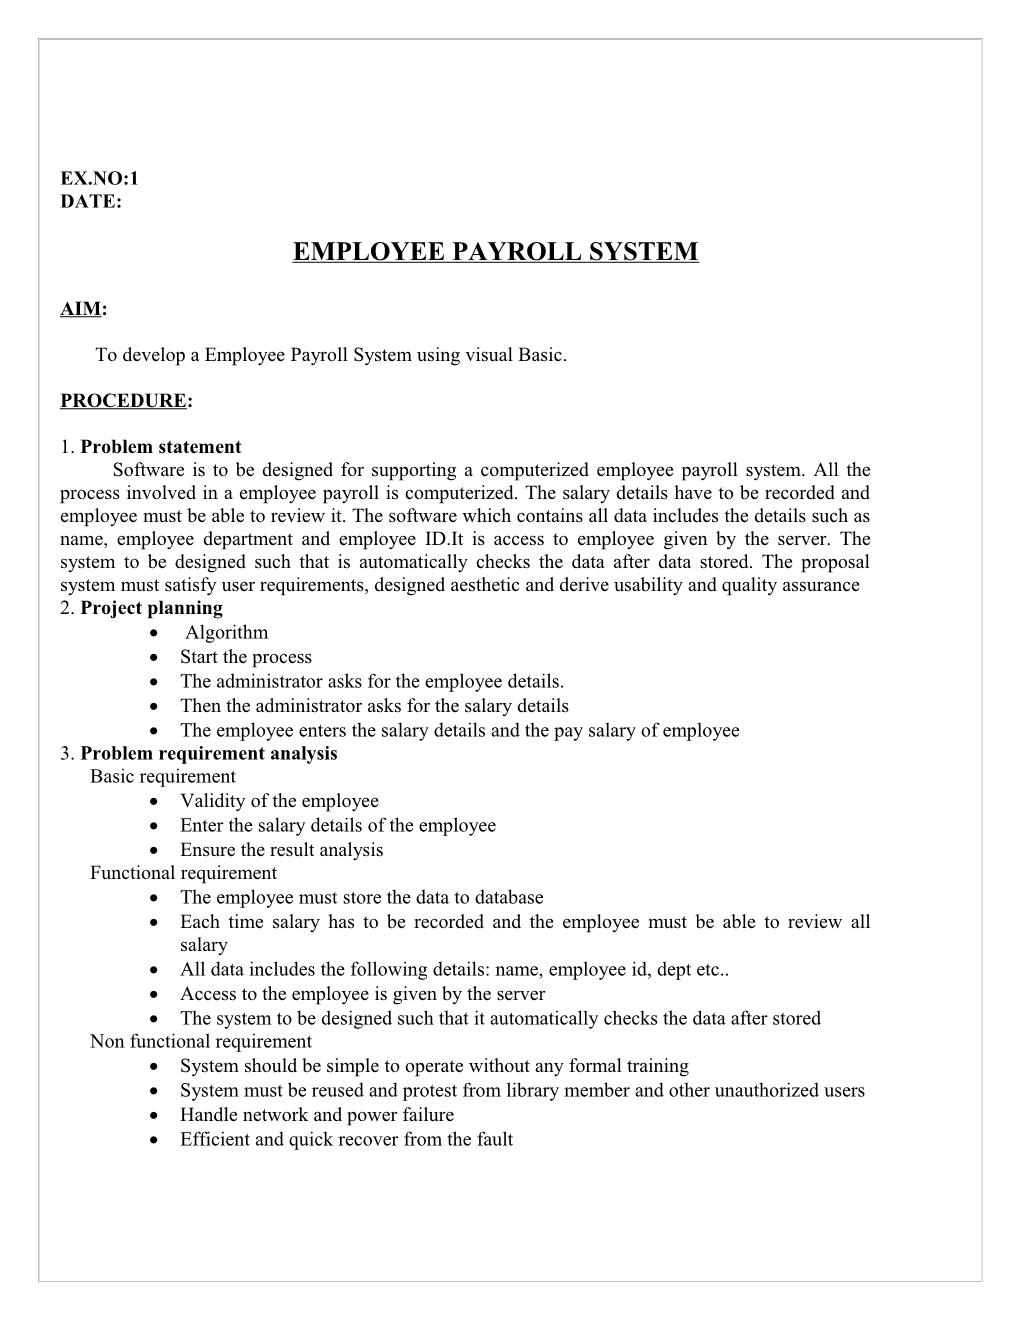 To Develop a Employee Payroll System Using Visual Basic